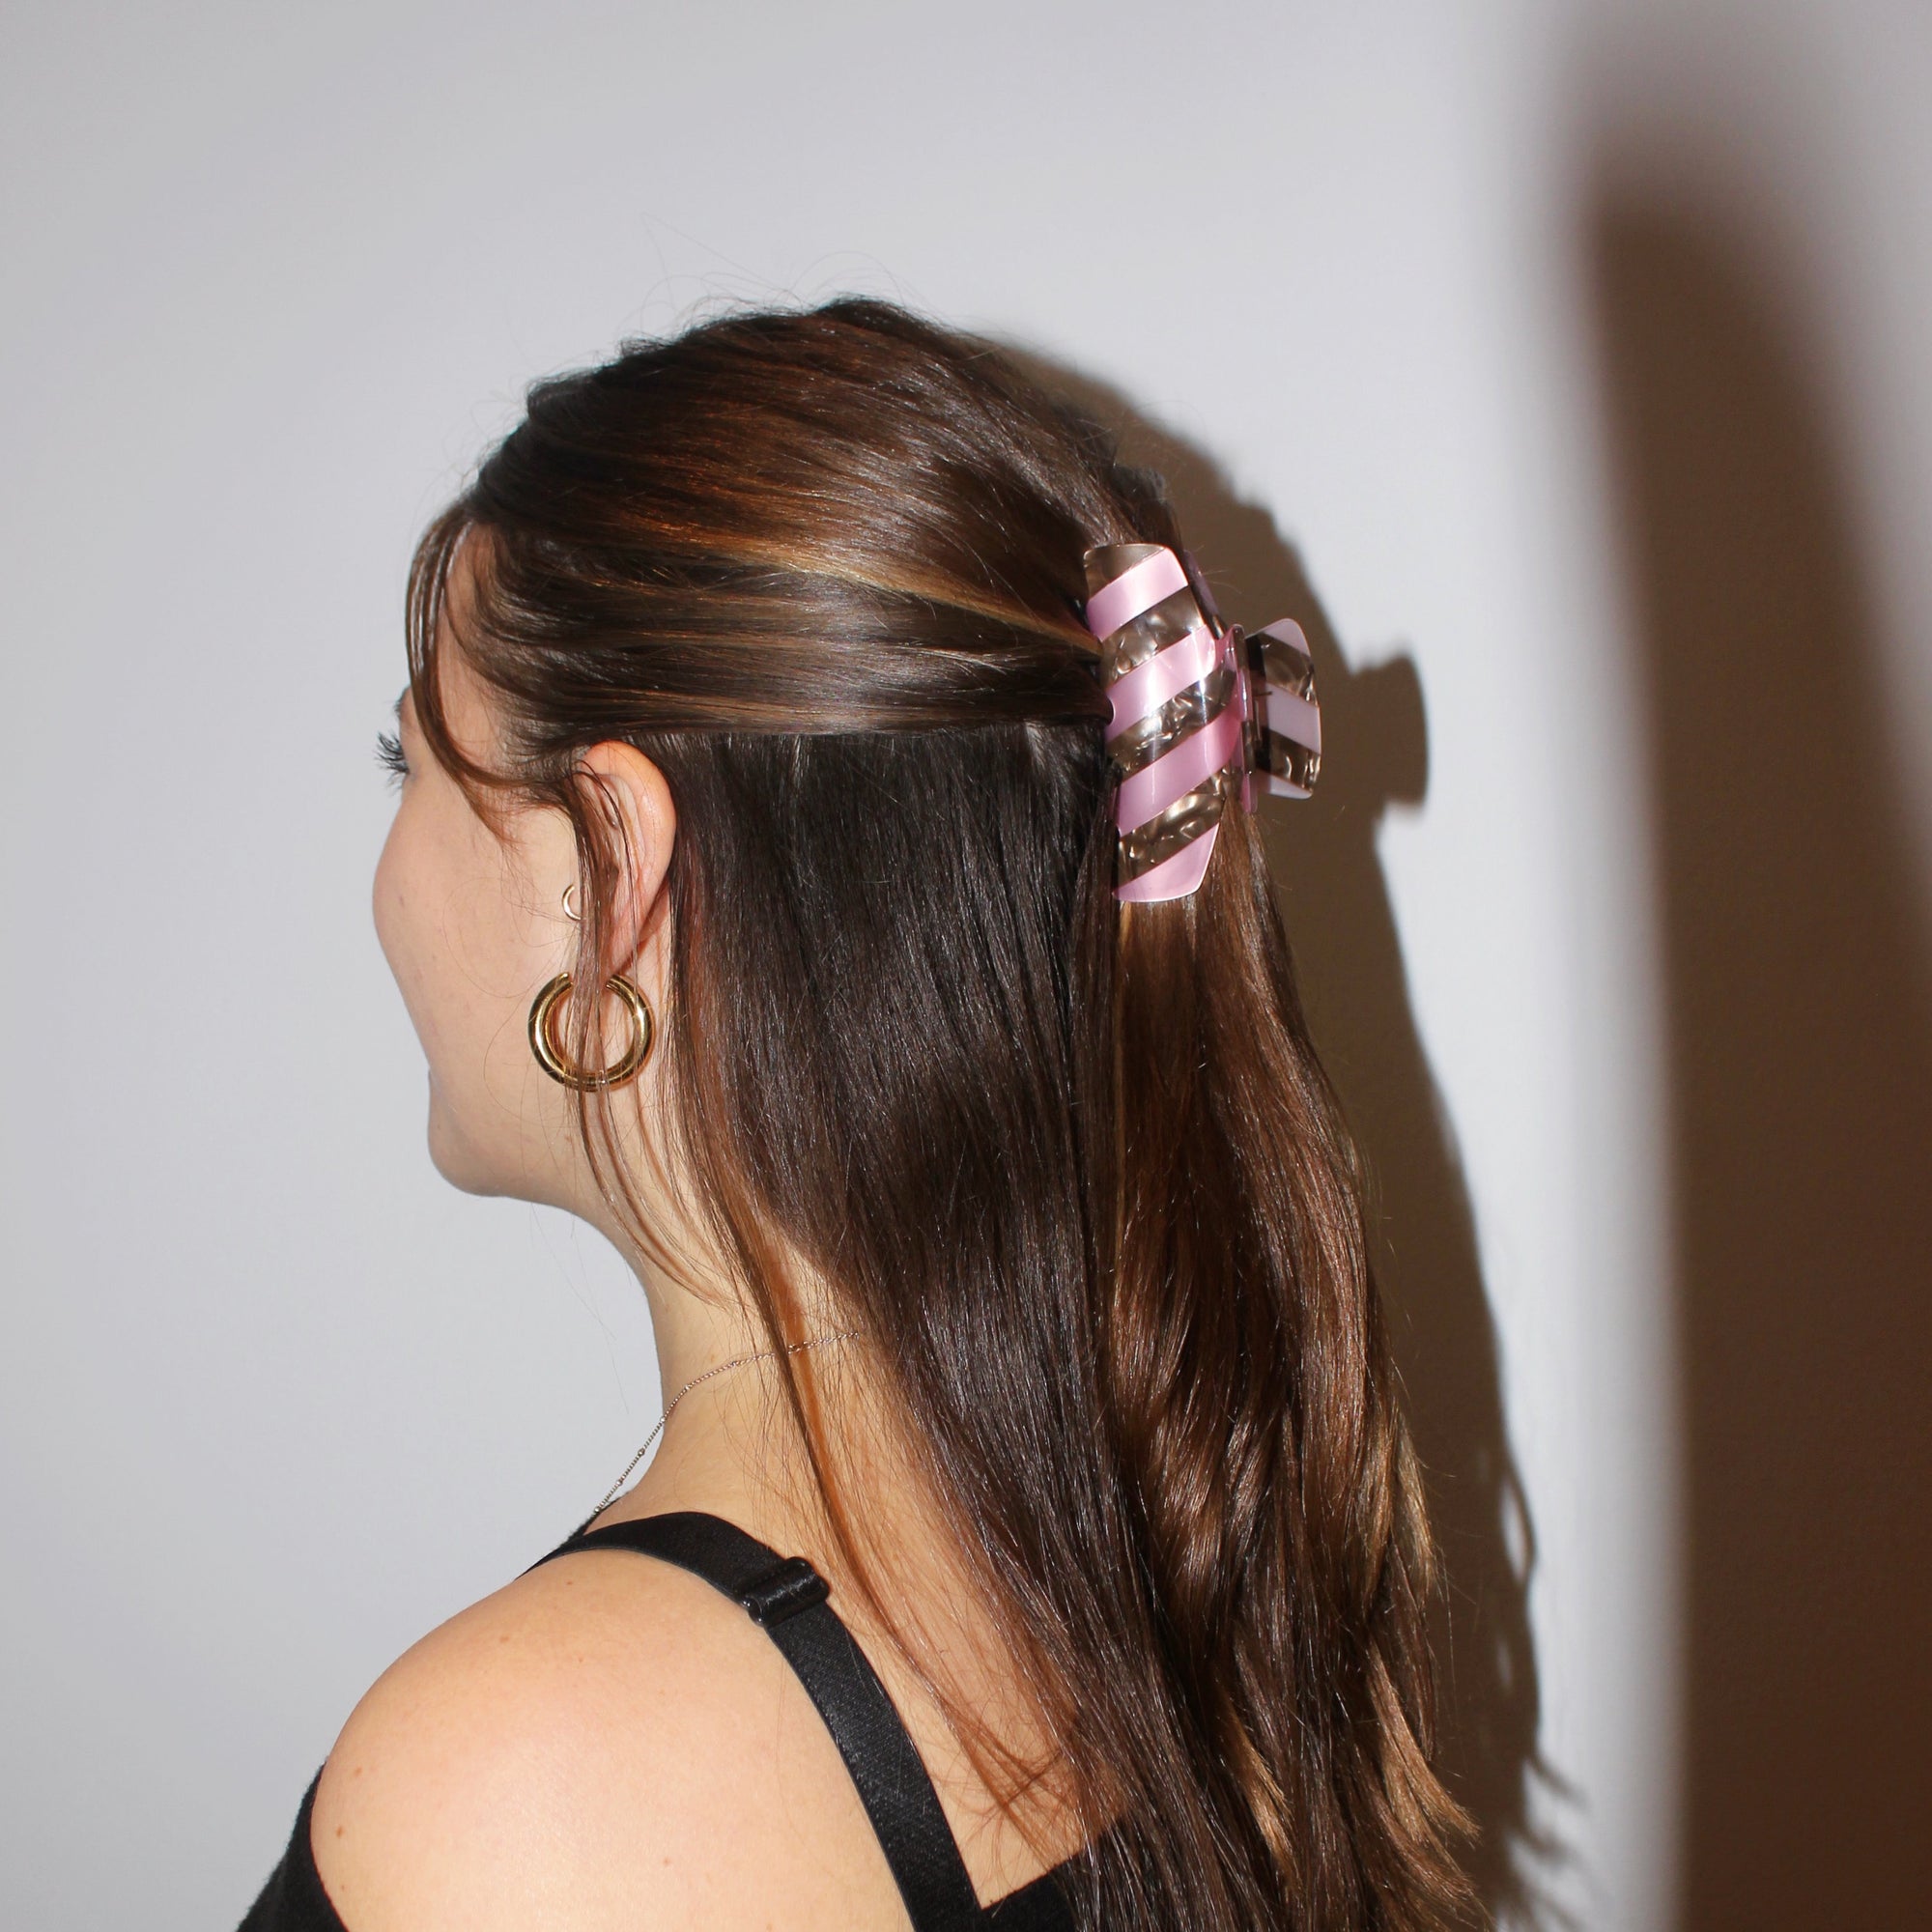 Meet LORA!  A medium sized silhouette claw in our signature stripes. Two resin patterns are merged together to create a colour combinations of dreams. The medium size makes it very easy to use and perfect for an all up look or securing a bun. For shorter hair it can be used for an all up look.  Each clip comes in a branded Tort pouch (colours change seasonally).  Size: 9cm  Colour: metallic pink and marbled chocolate brown stripe  Material: eco-resin 